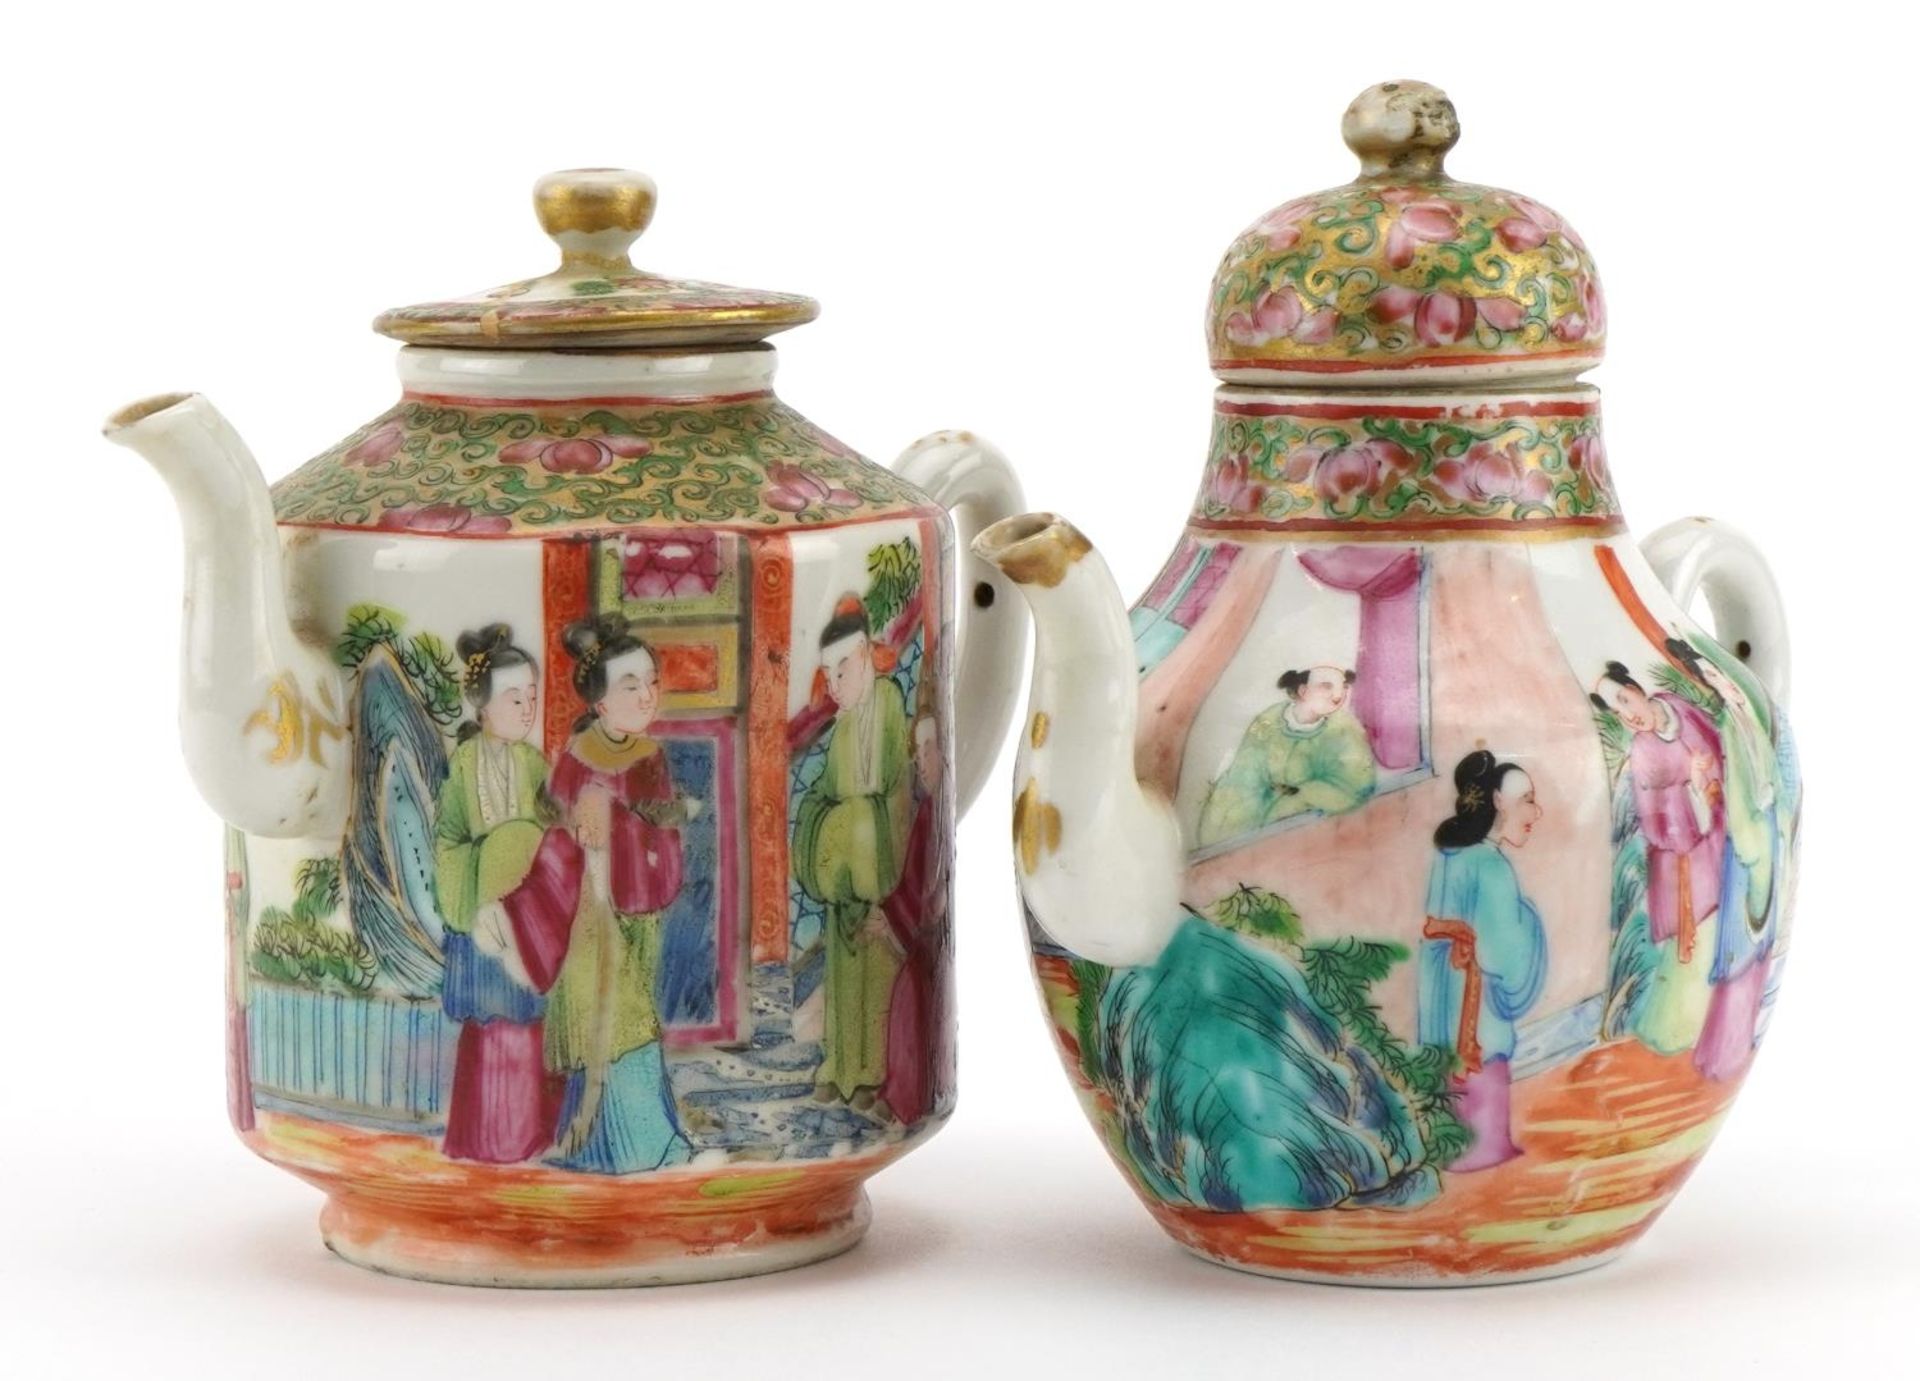 Two Chinese Canton porcelain teapots hand painted with figures and flowers, the largest 13.5cm in